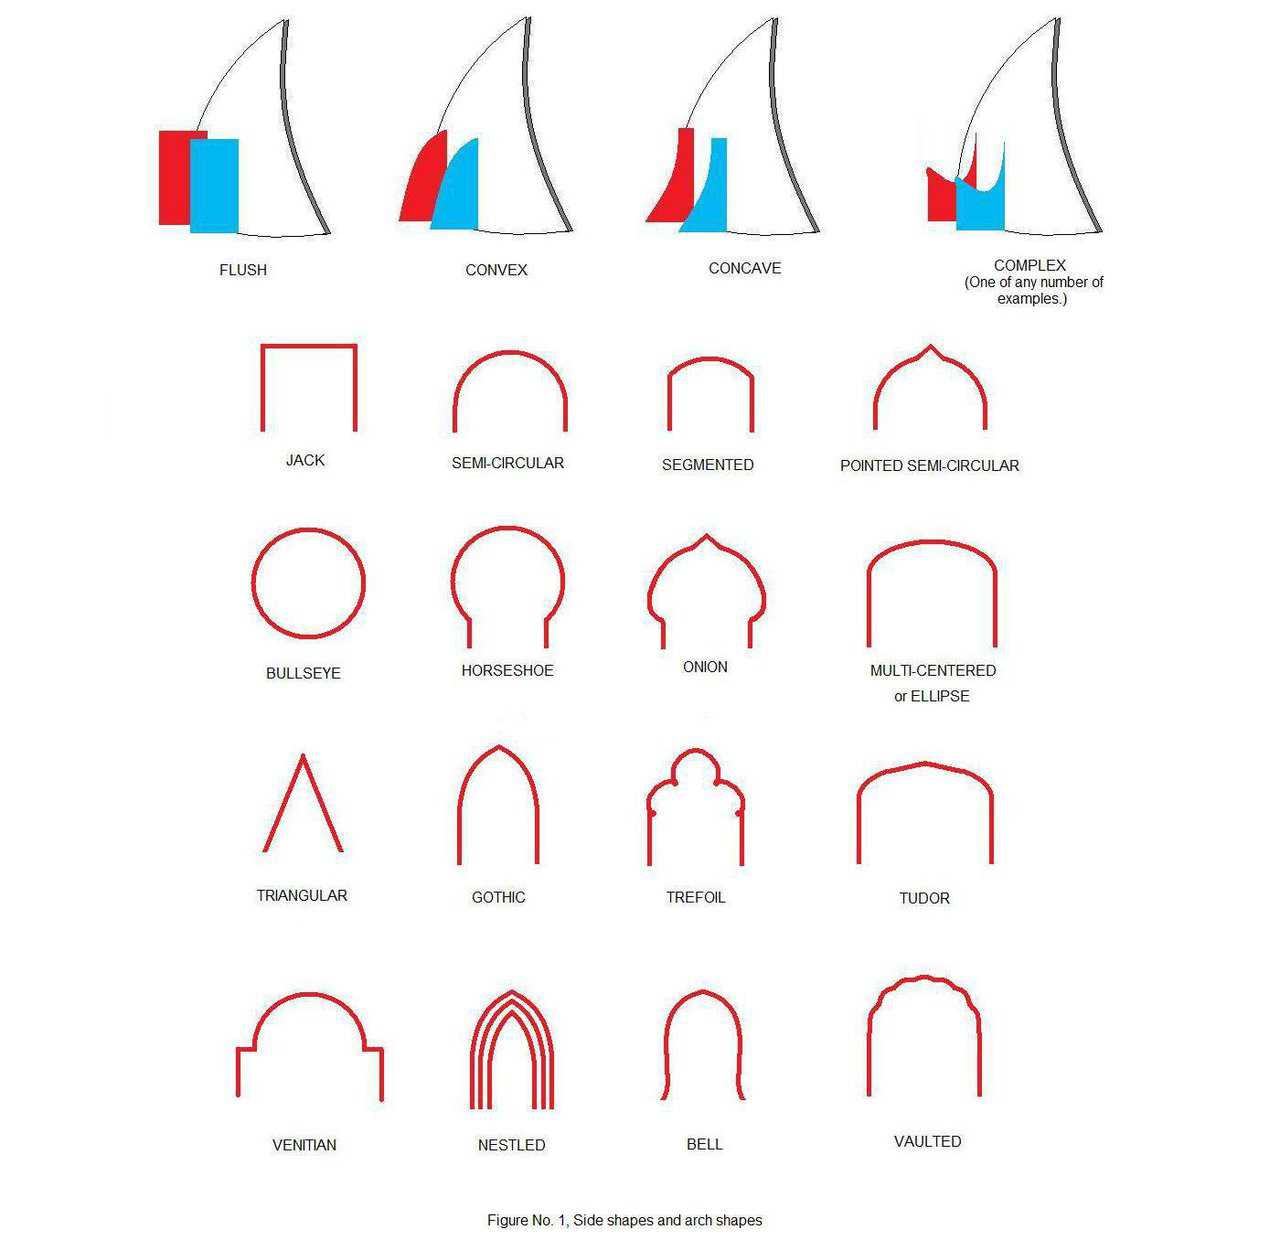 Side shapes and arch shapes